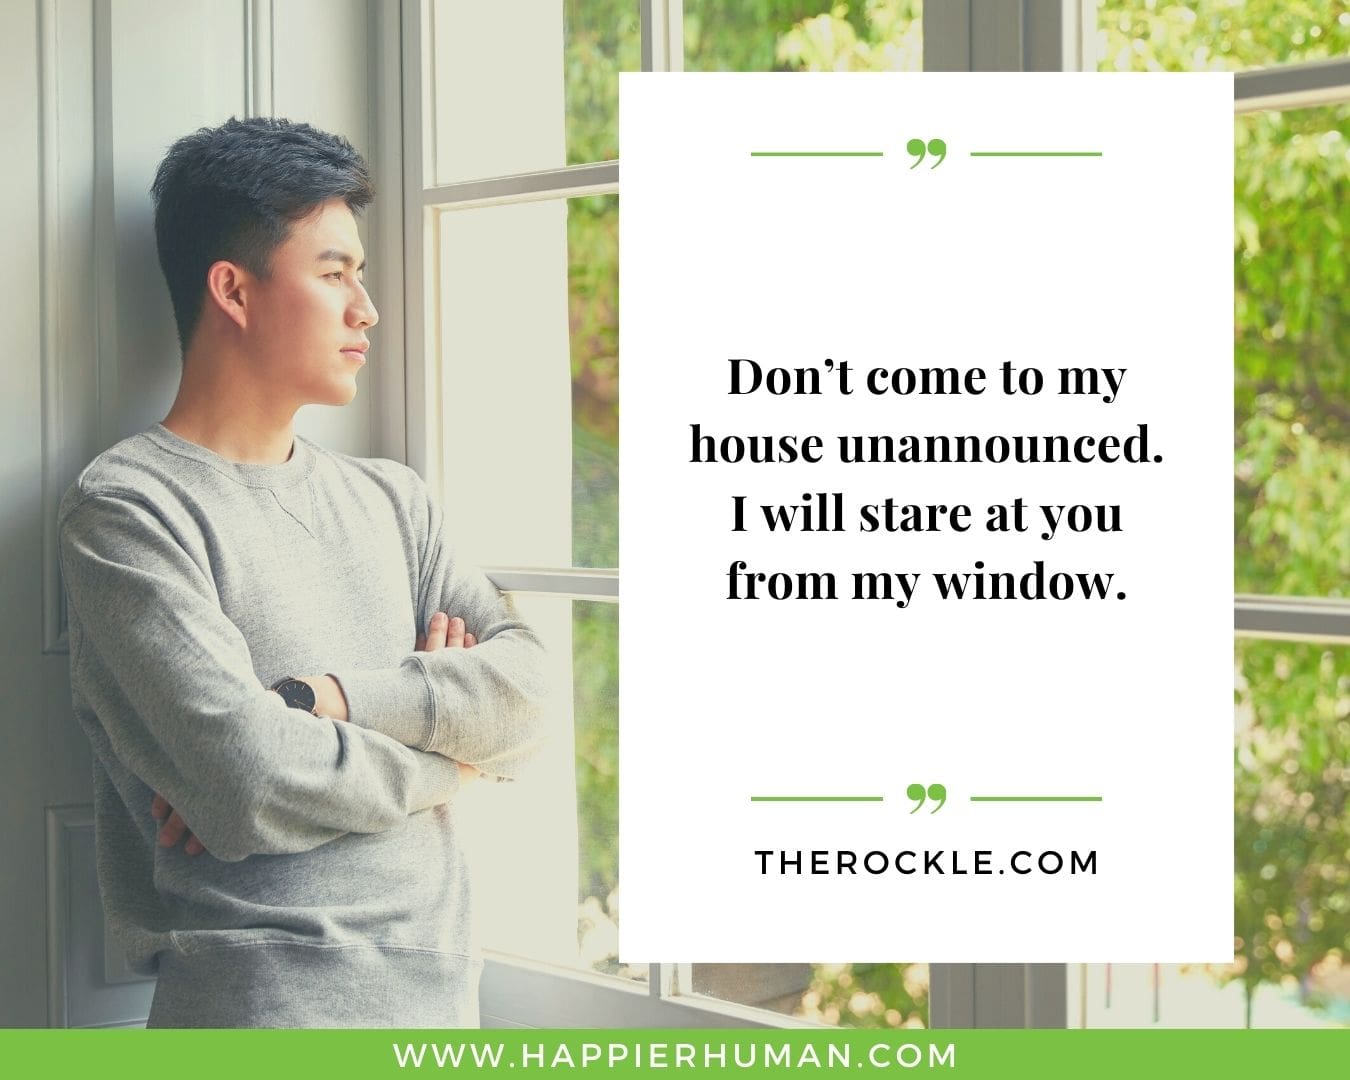 Introvert Quotes - “Don’t come to my house unannounced. I will stare at you from my window.” – TheRockle.com